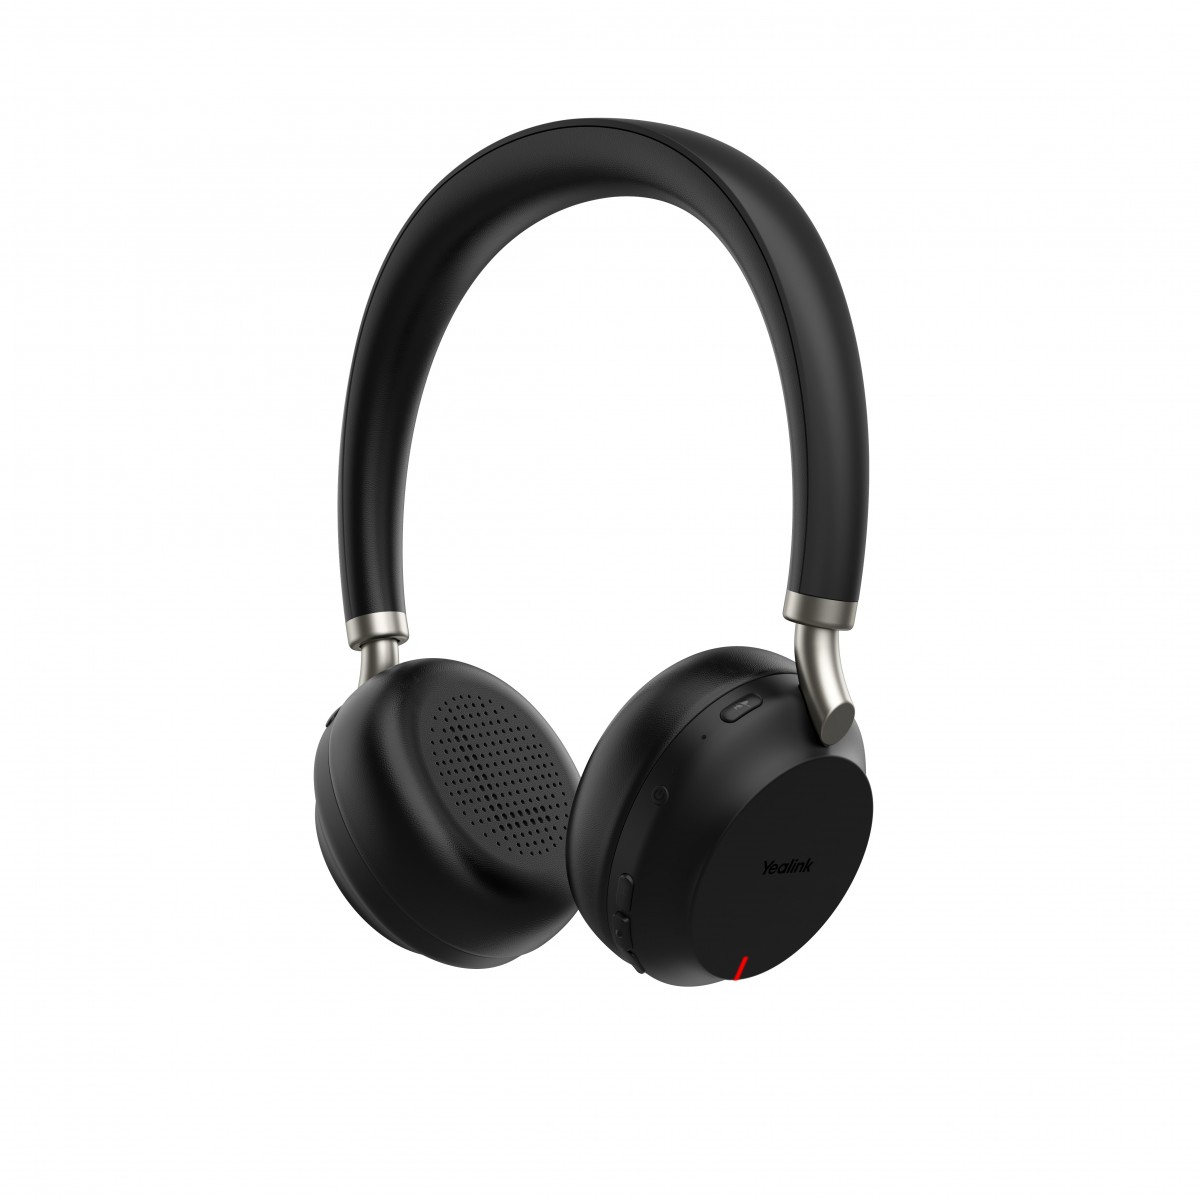 Yealink Bluetooth Headset - BH72 with Charging Stand Teams Black USB-C - Headset - Bluetooth